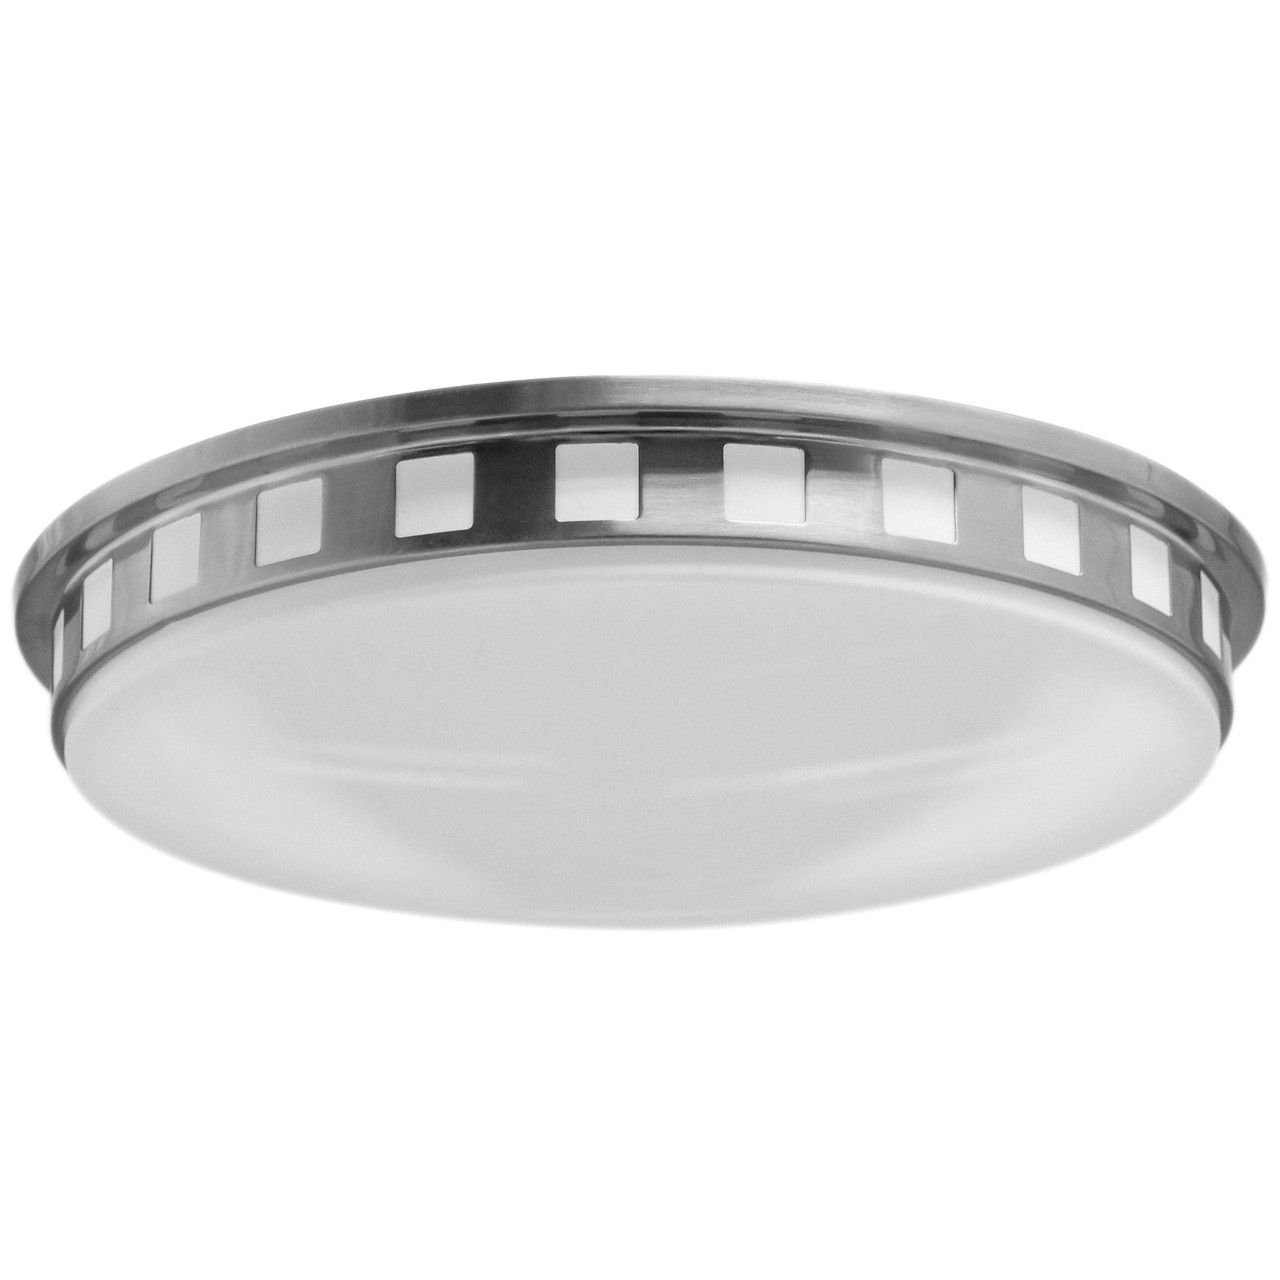 18"W Brushed Nickel Ceiling Light with Frosted Acrylic Shade